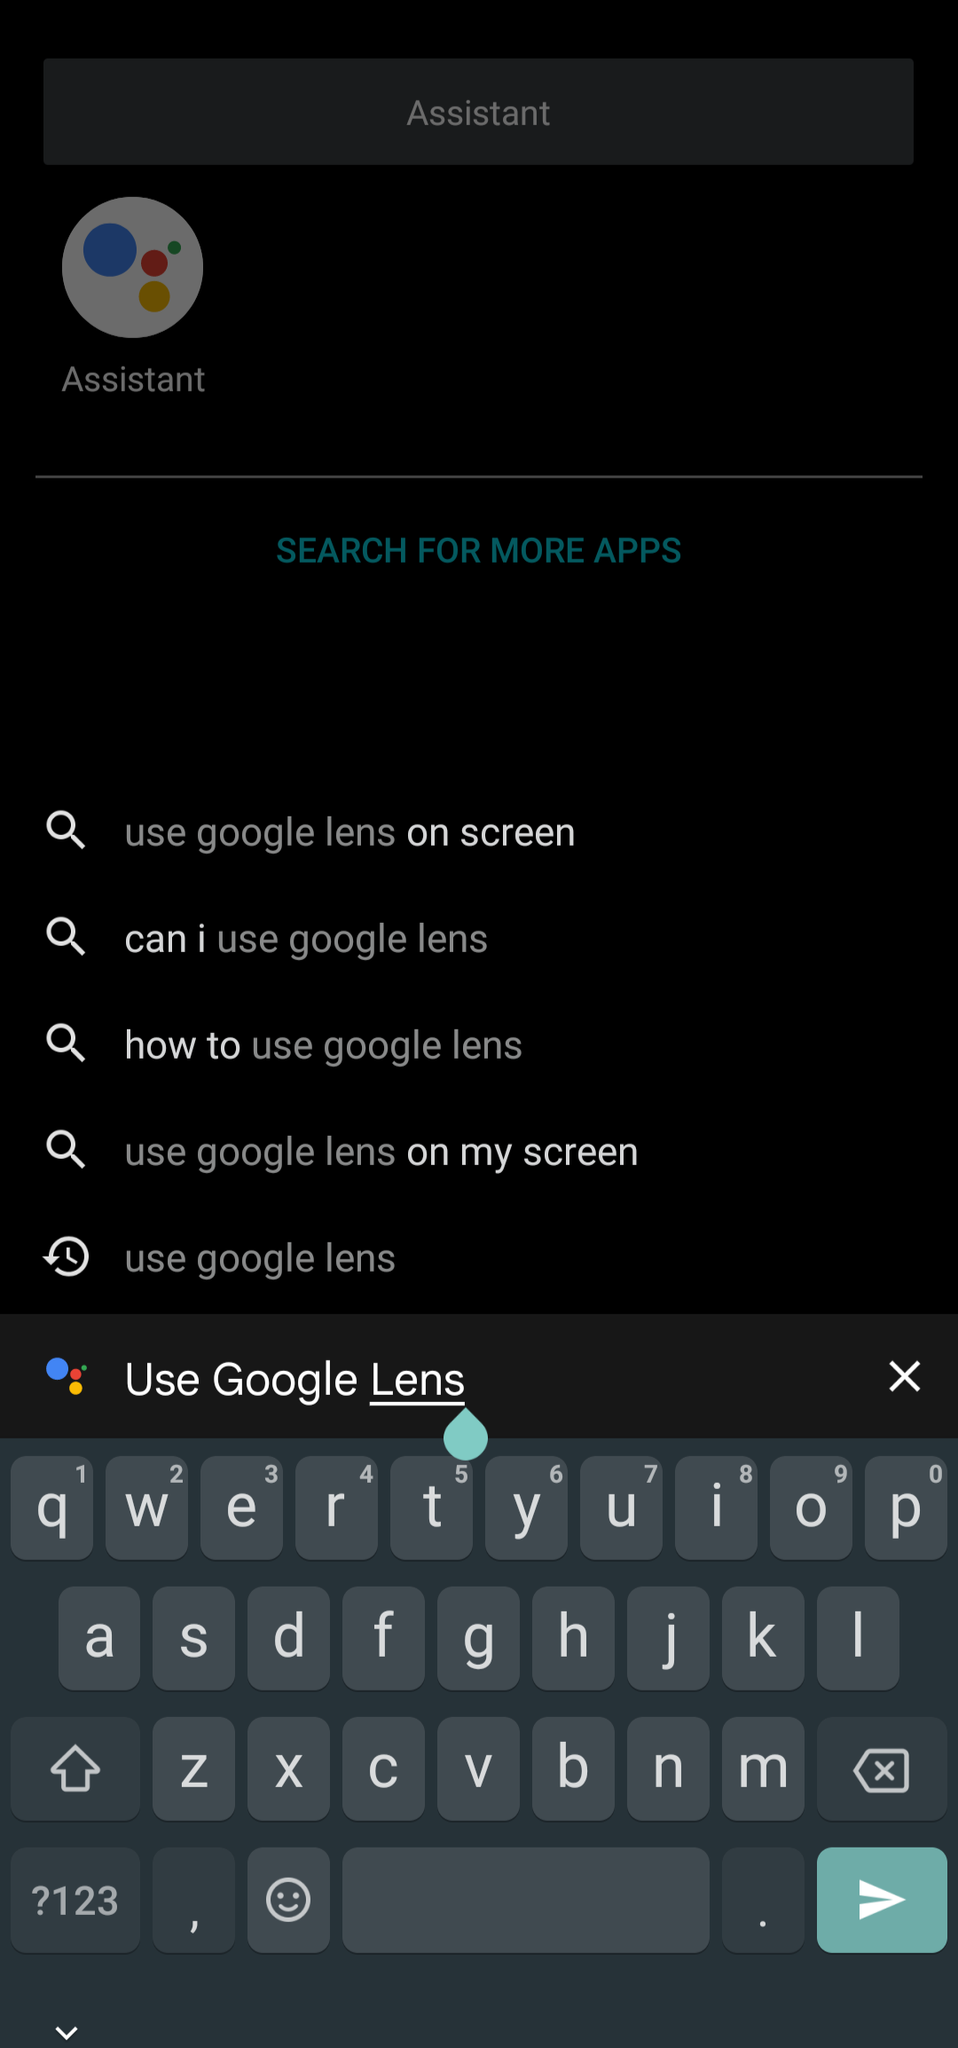 Image shows the command Use Google Lens typed into the Google Assistant command bar.